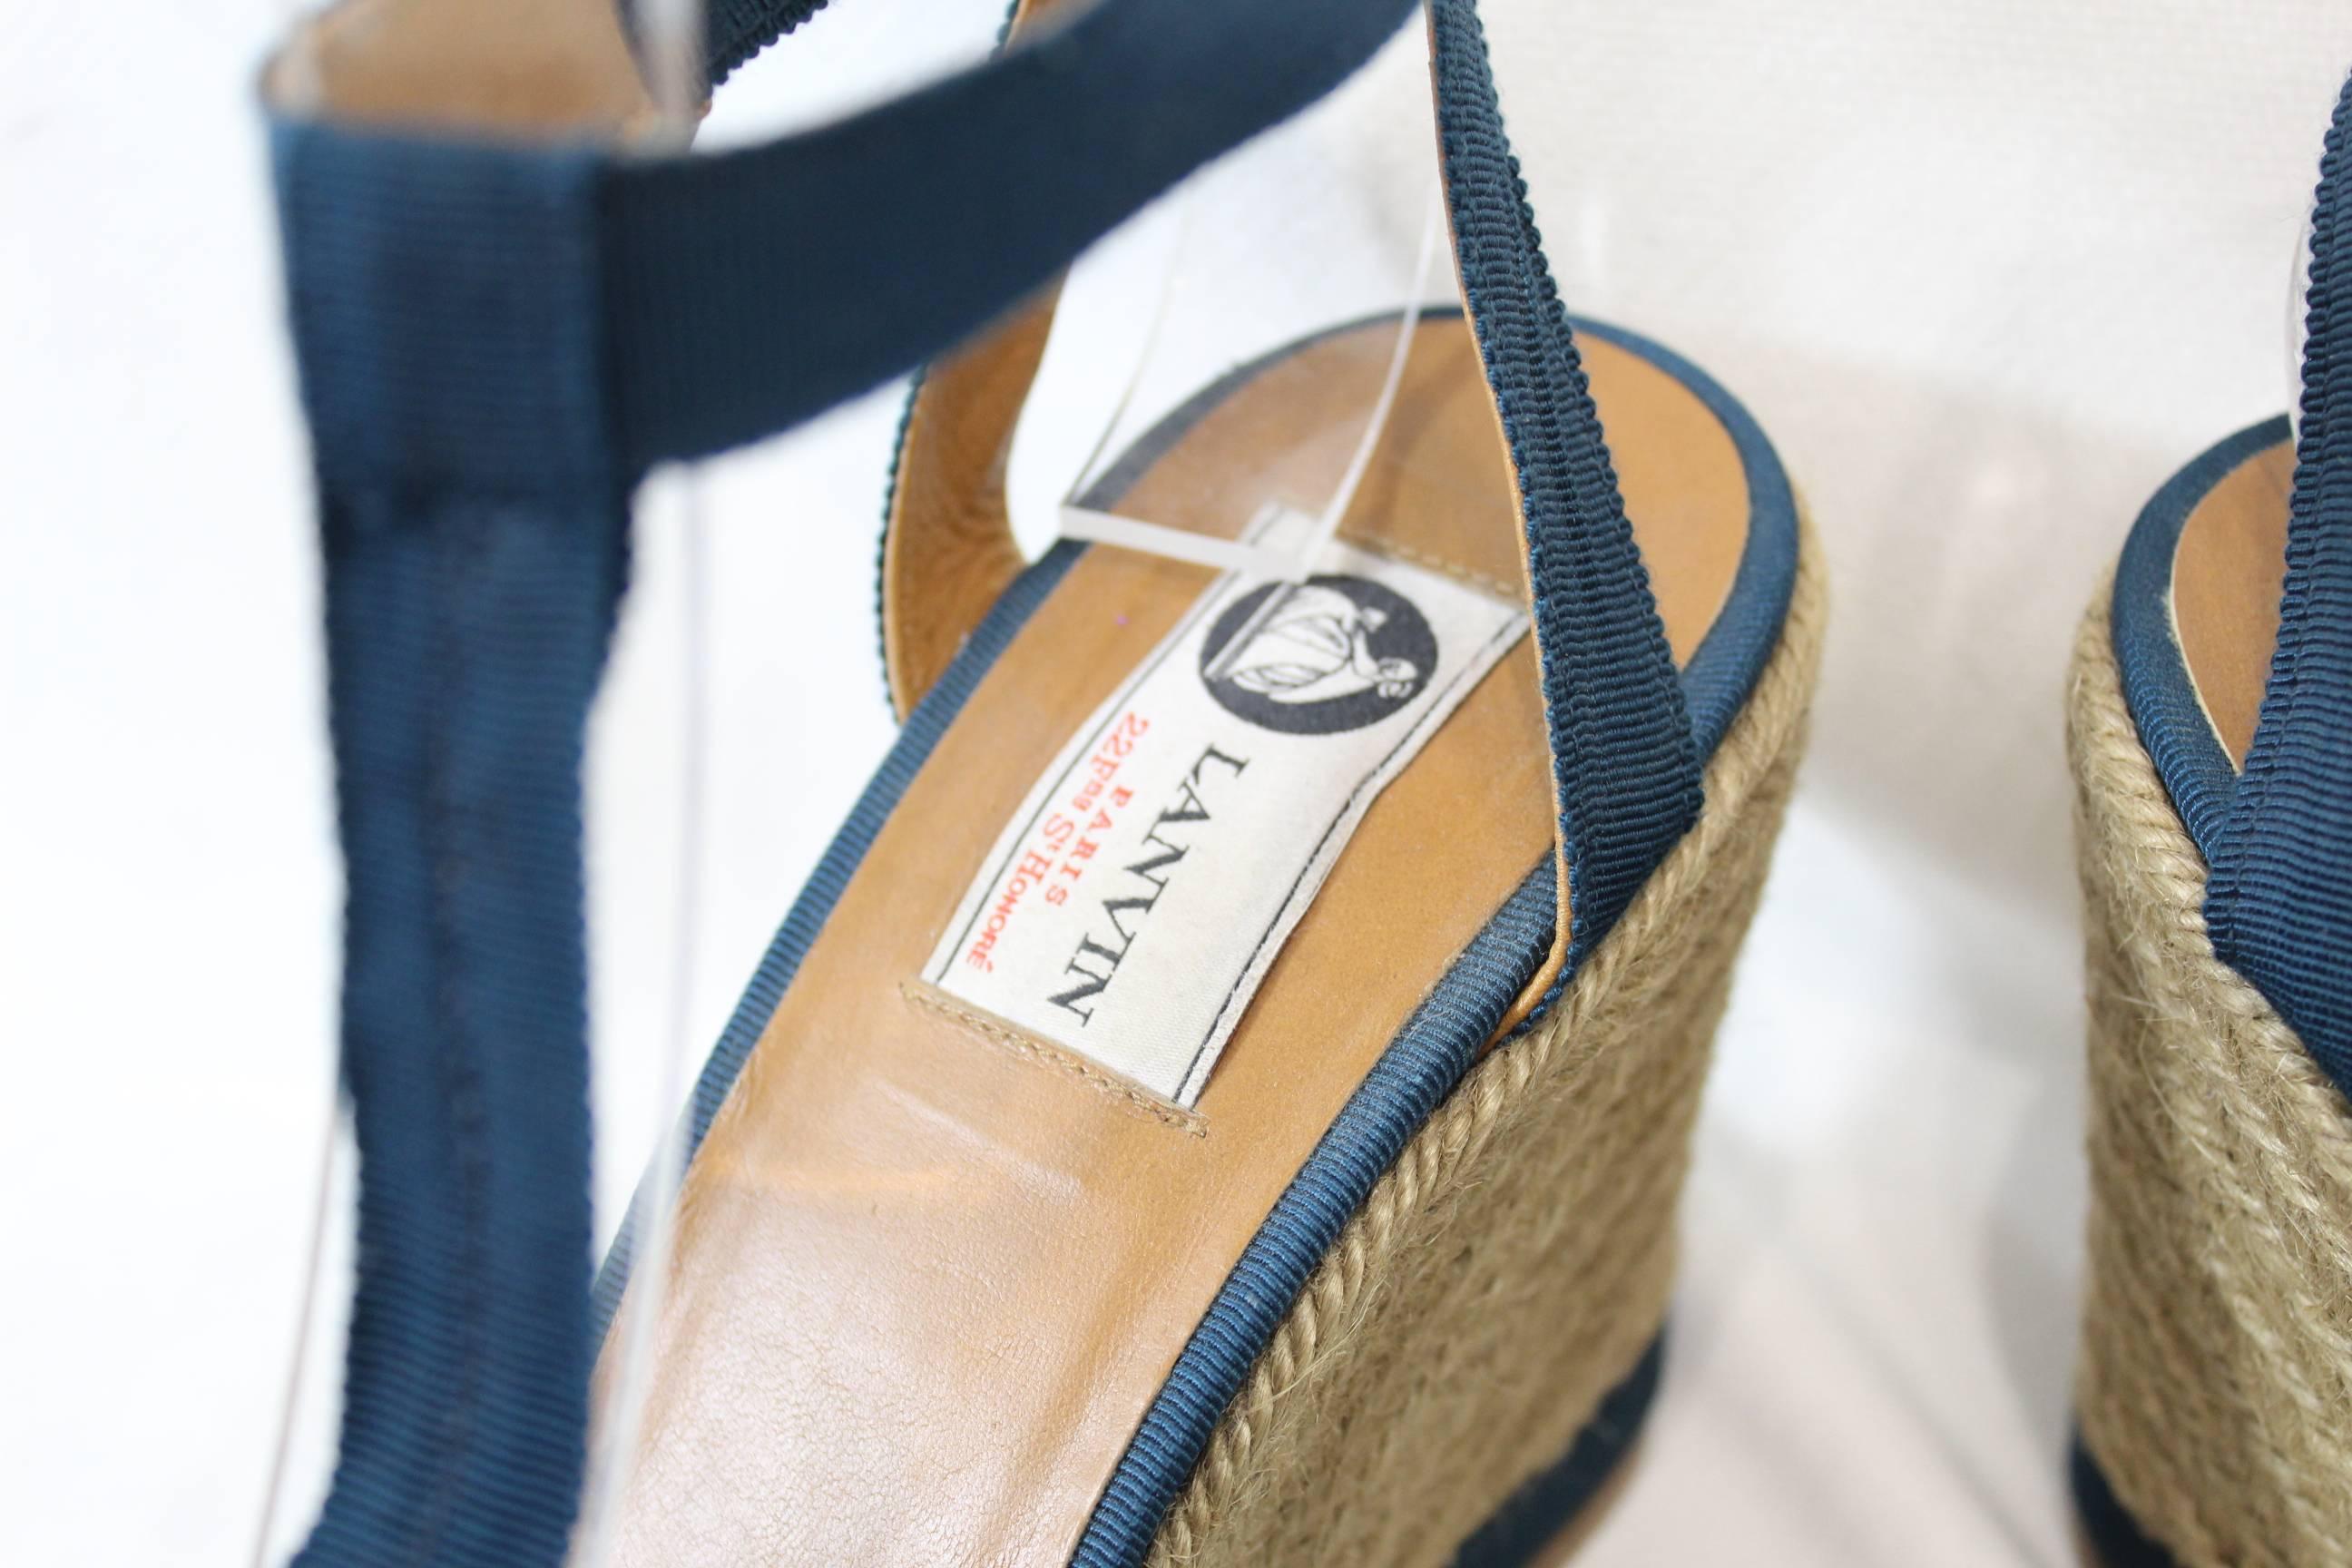 Women's Nice Lanvin Espadrilles in Canvas and Cord. Size US 9 (EU 41) For Sale